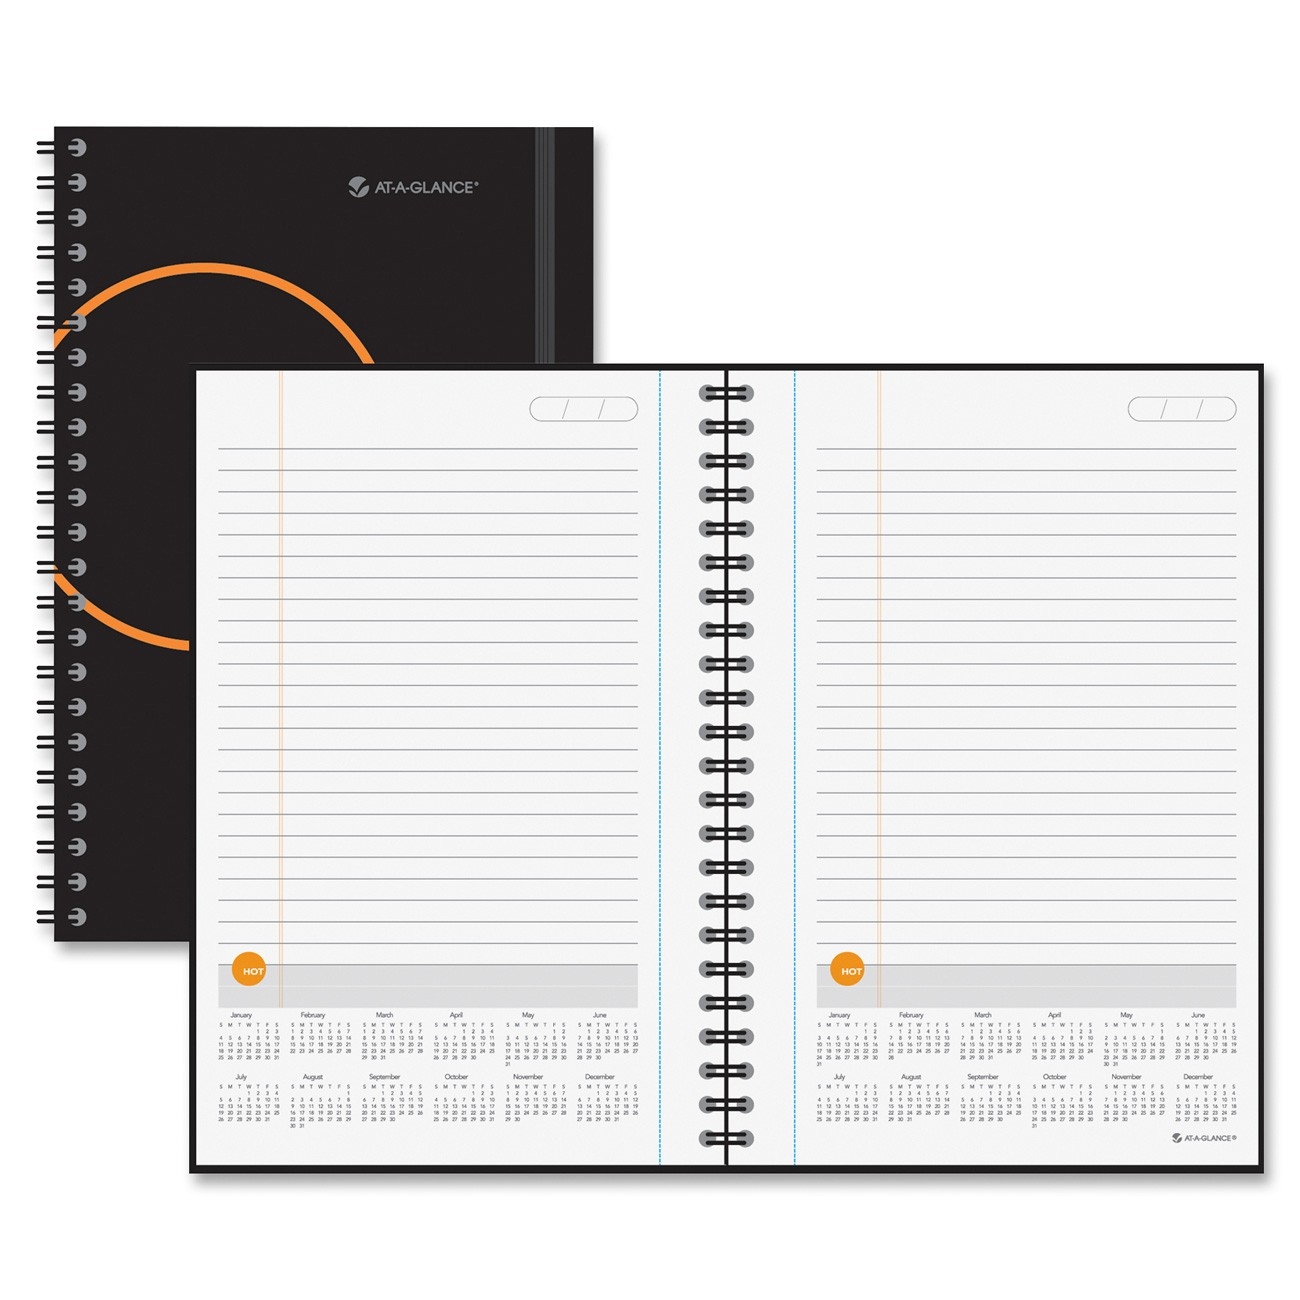 Planning Notebook Lined With Monthly Calendars-Notebook With Monthly Calendar